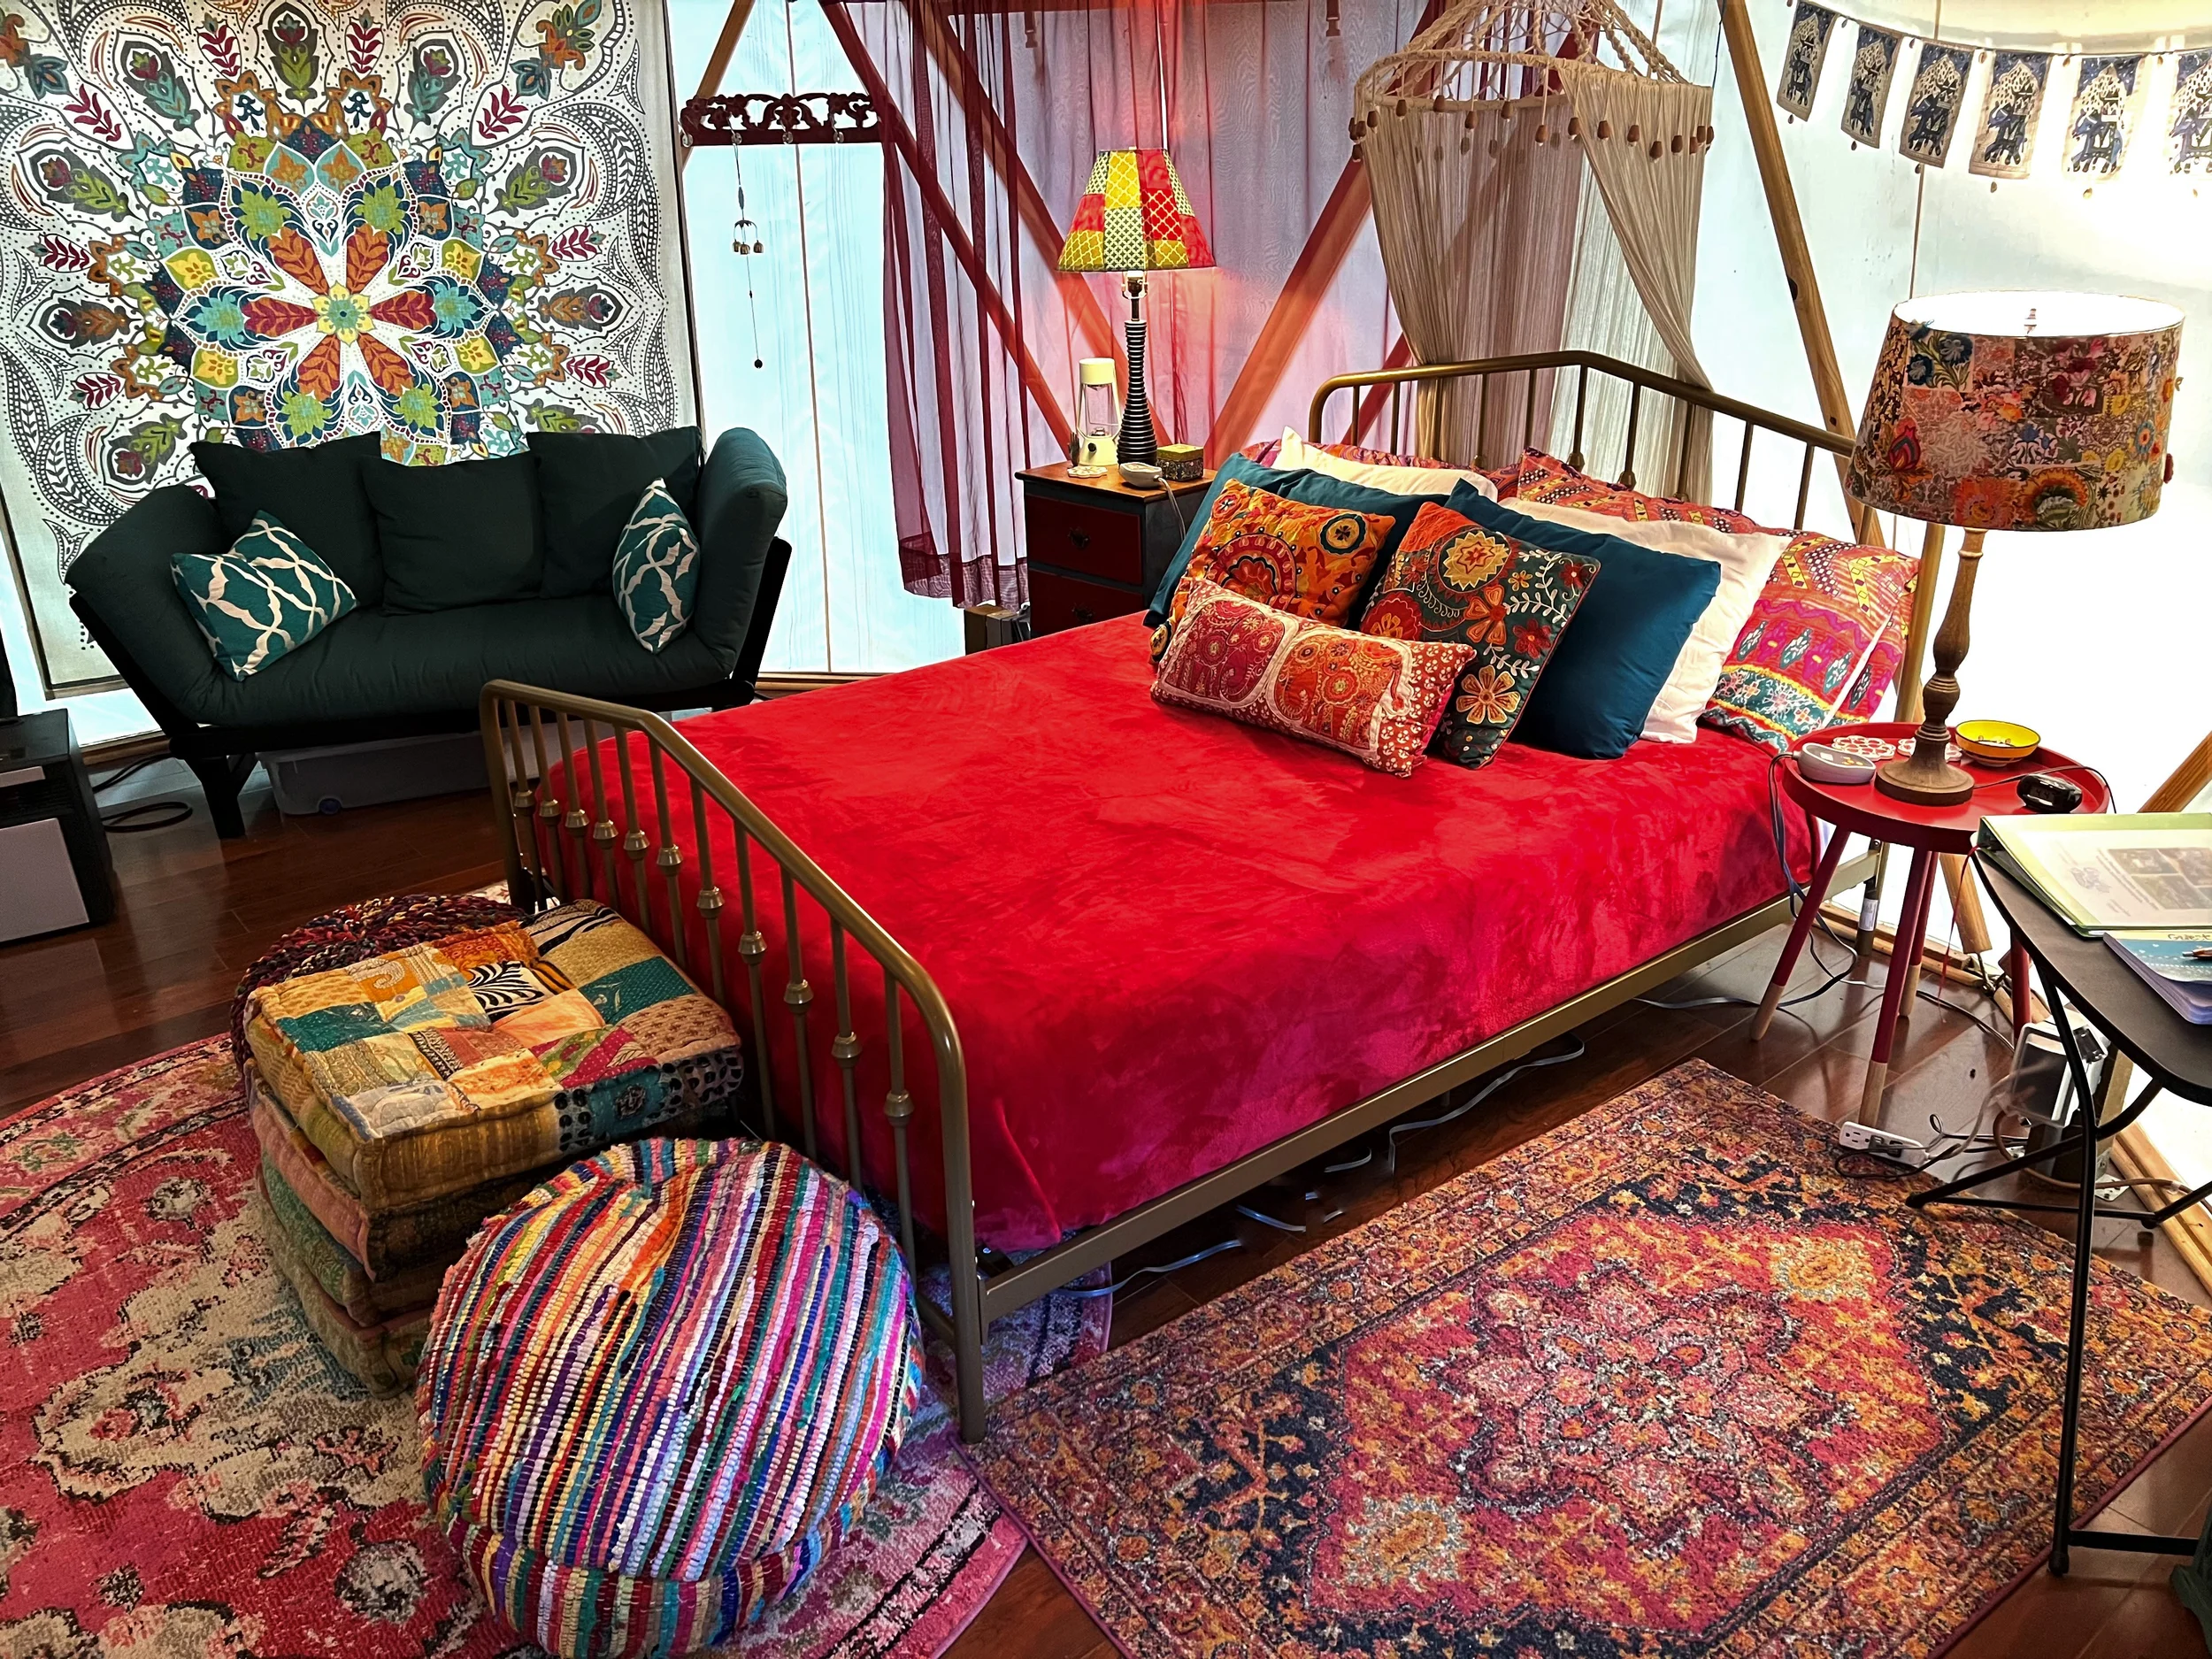 Inside of the Bohemian style Yurt with colorful decor